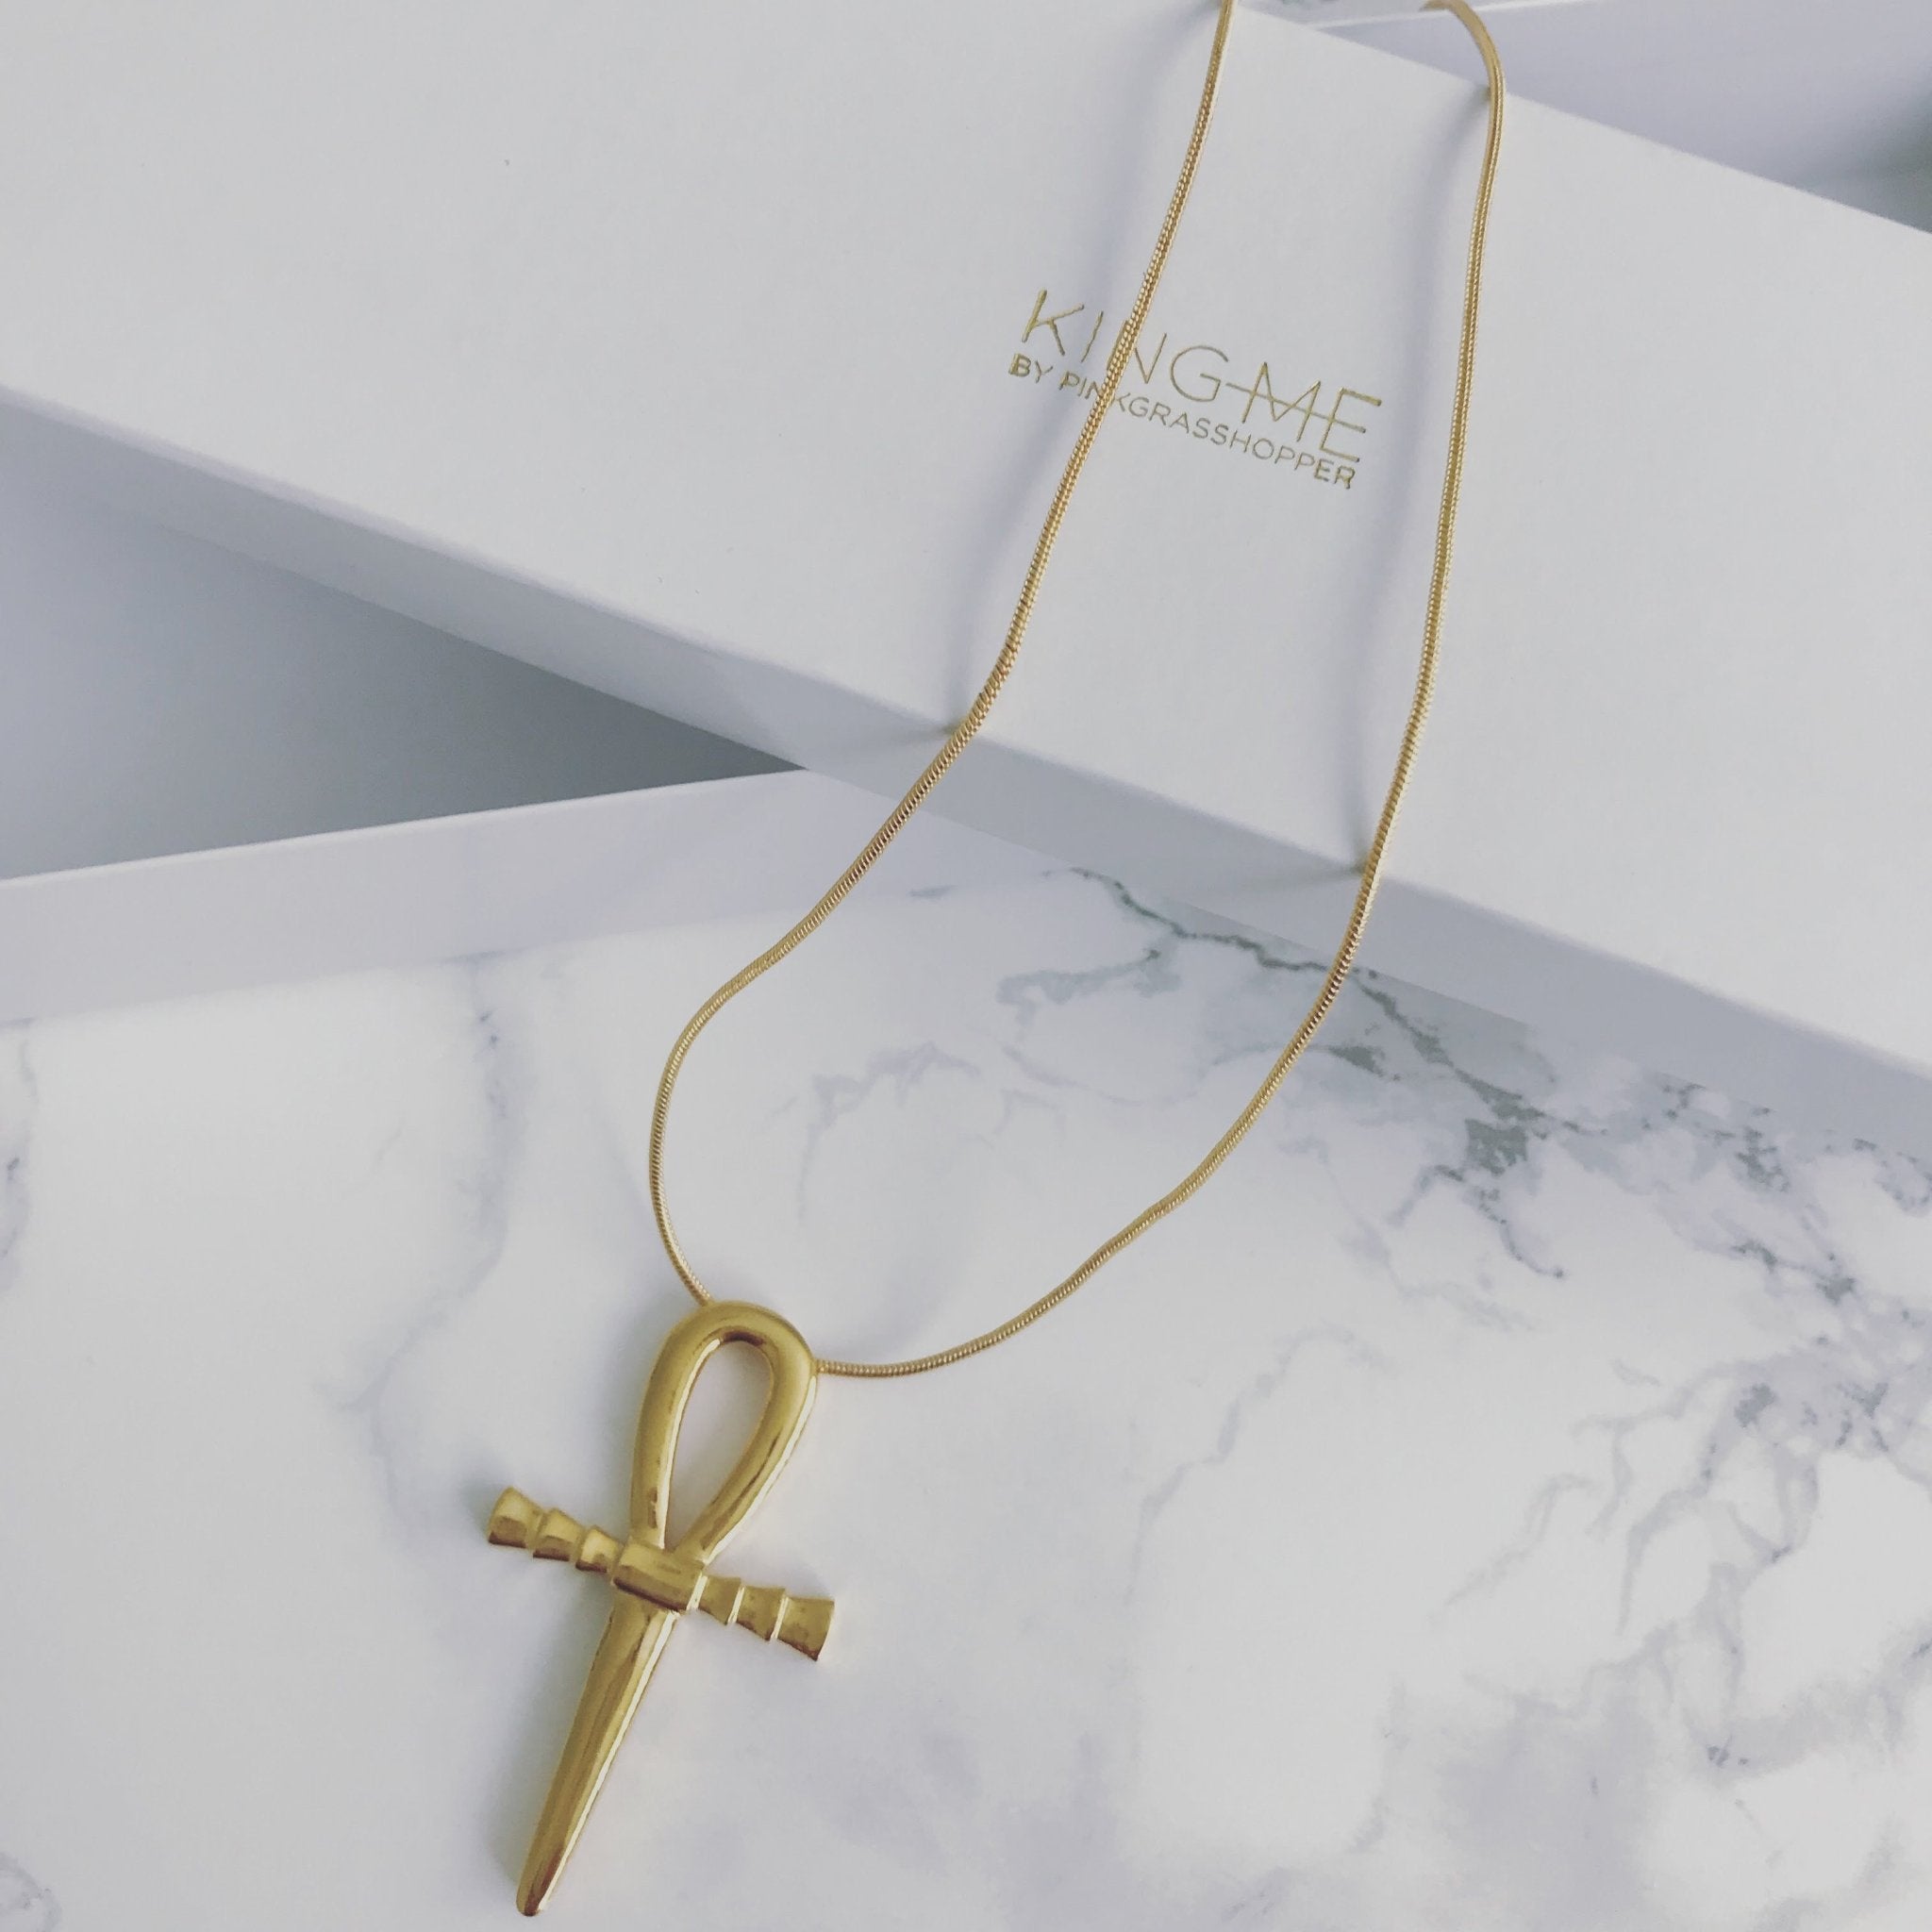 KING BEY'S ANKH NECKLACE - KING ME Custom Jewelry by PG